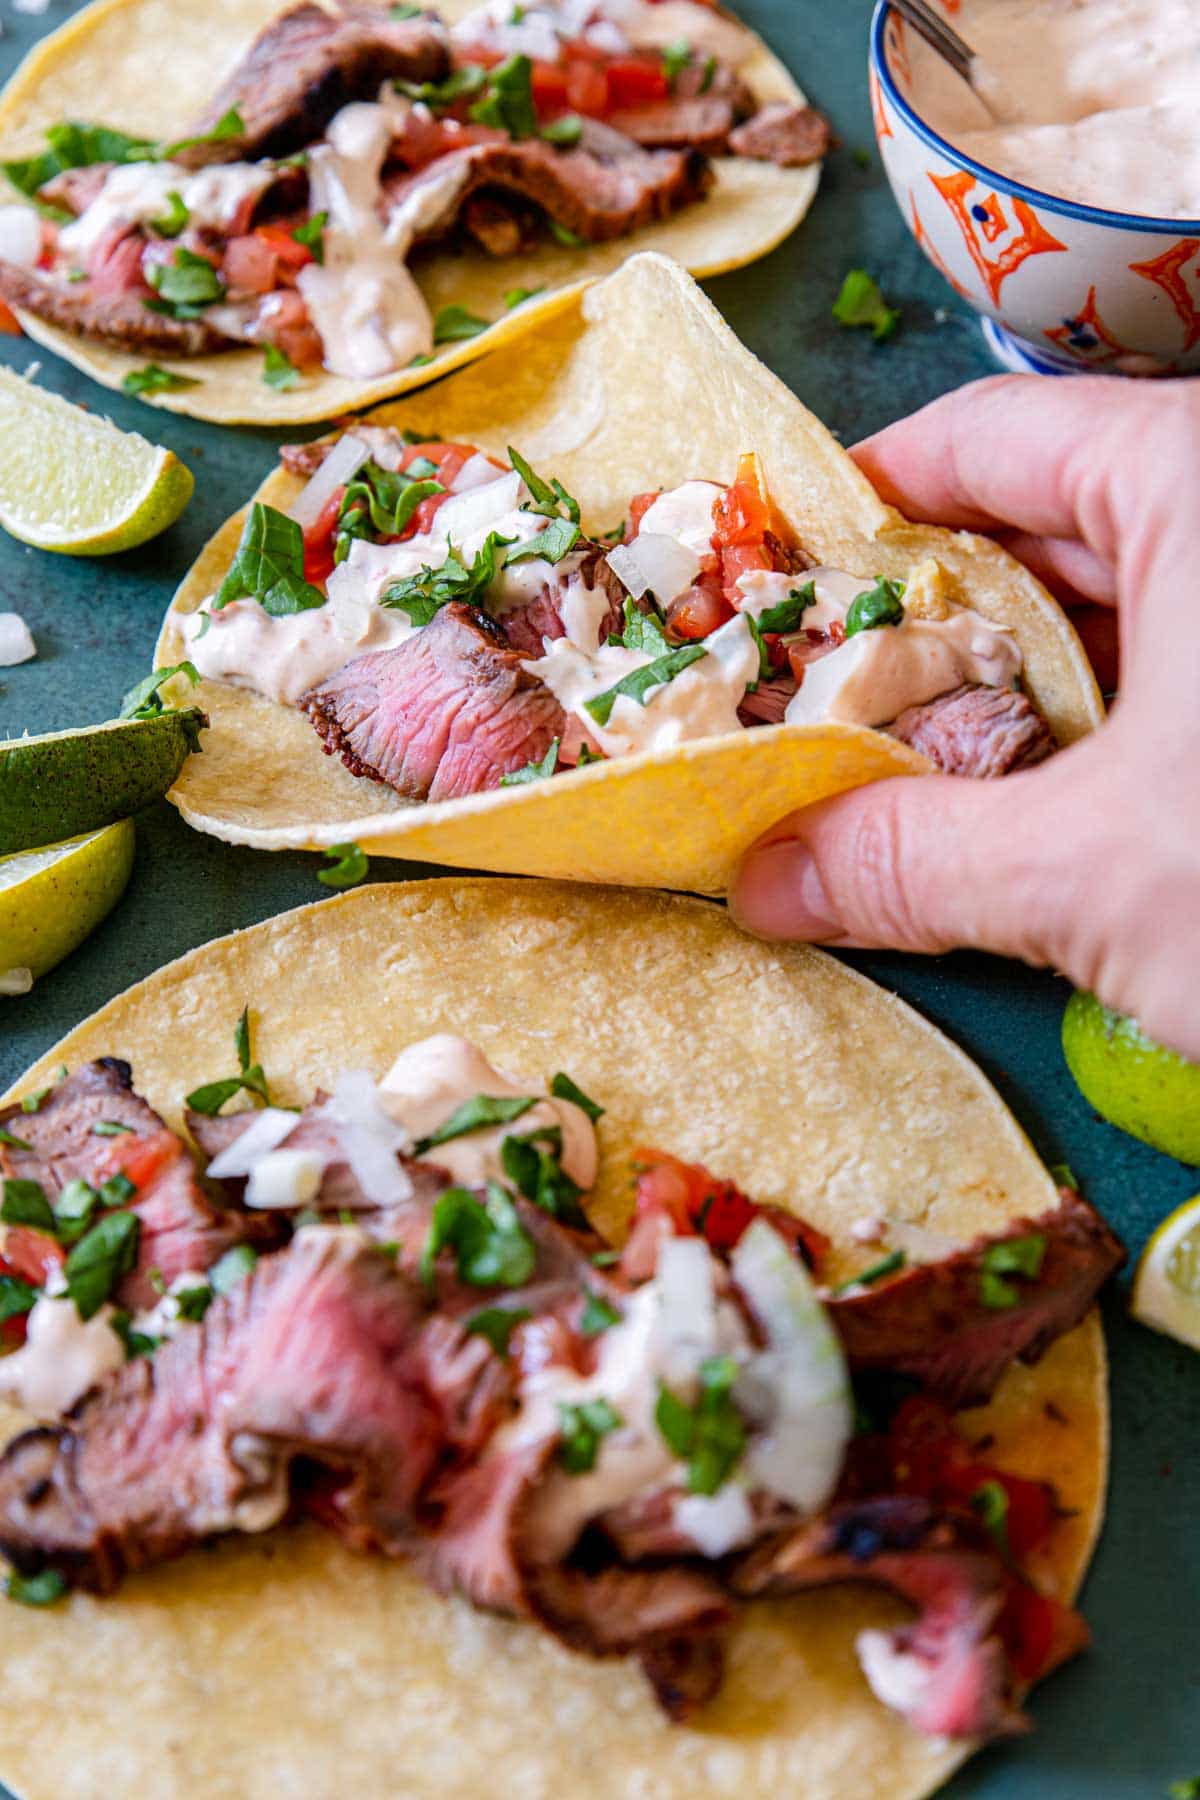 a hand picking up a grilled steak taco